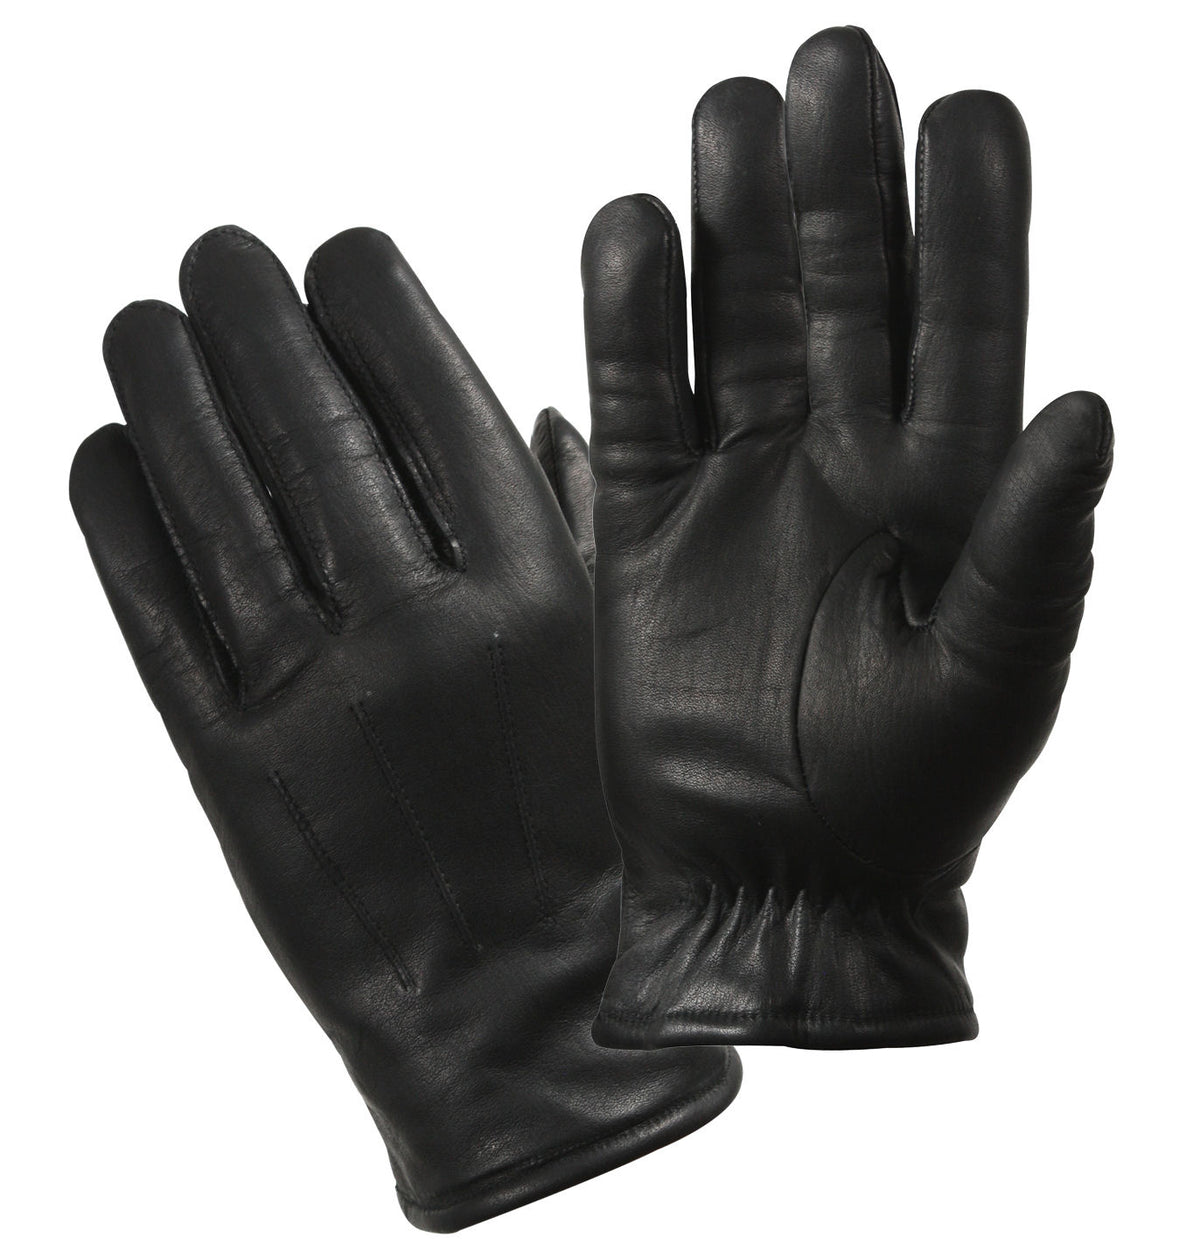 Rothco Cold Weather Leather Police Gloves - BLACK